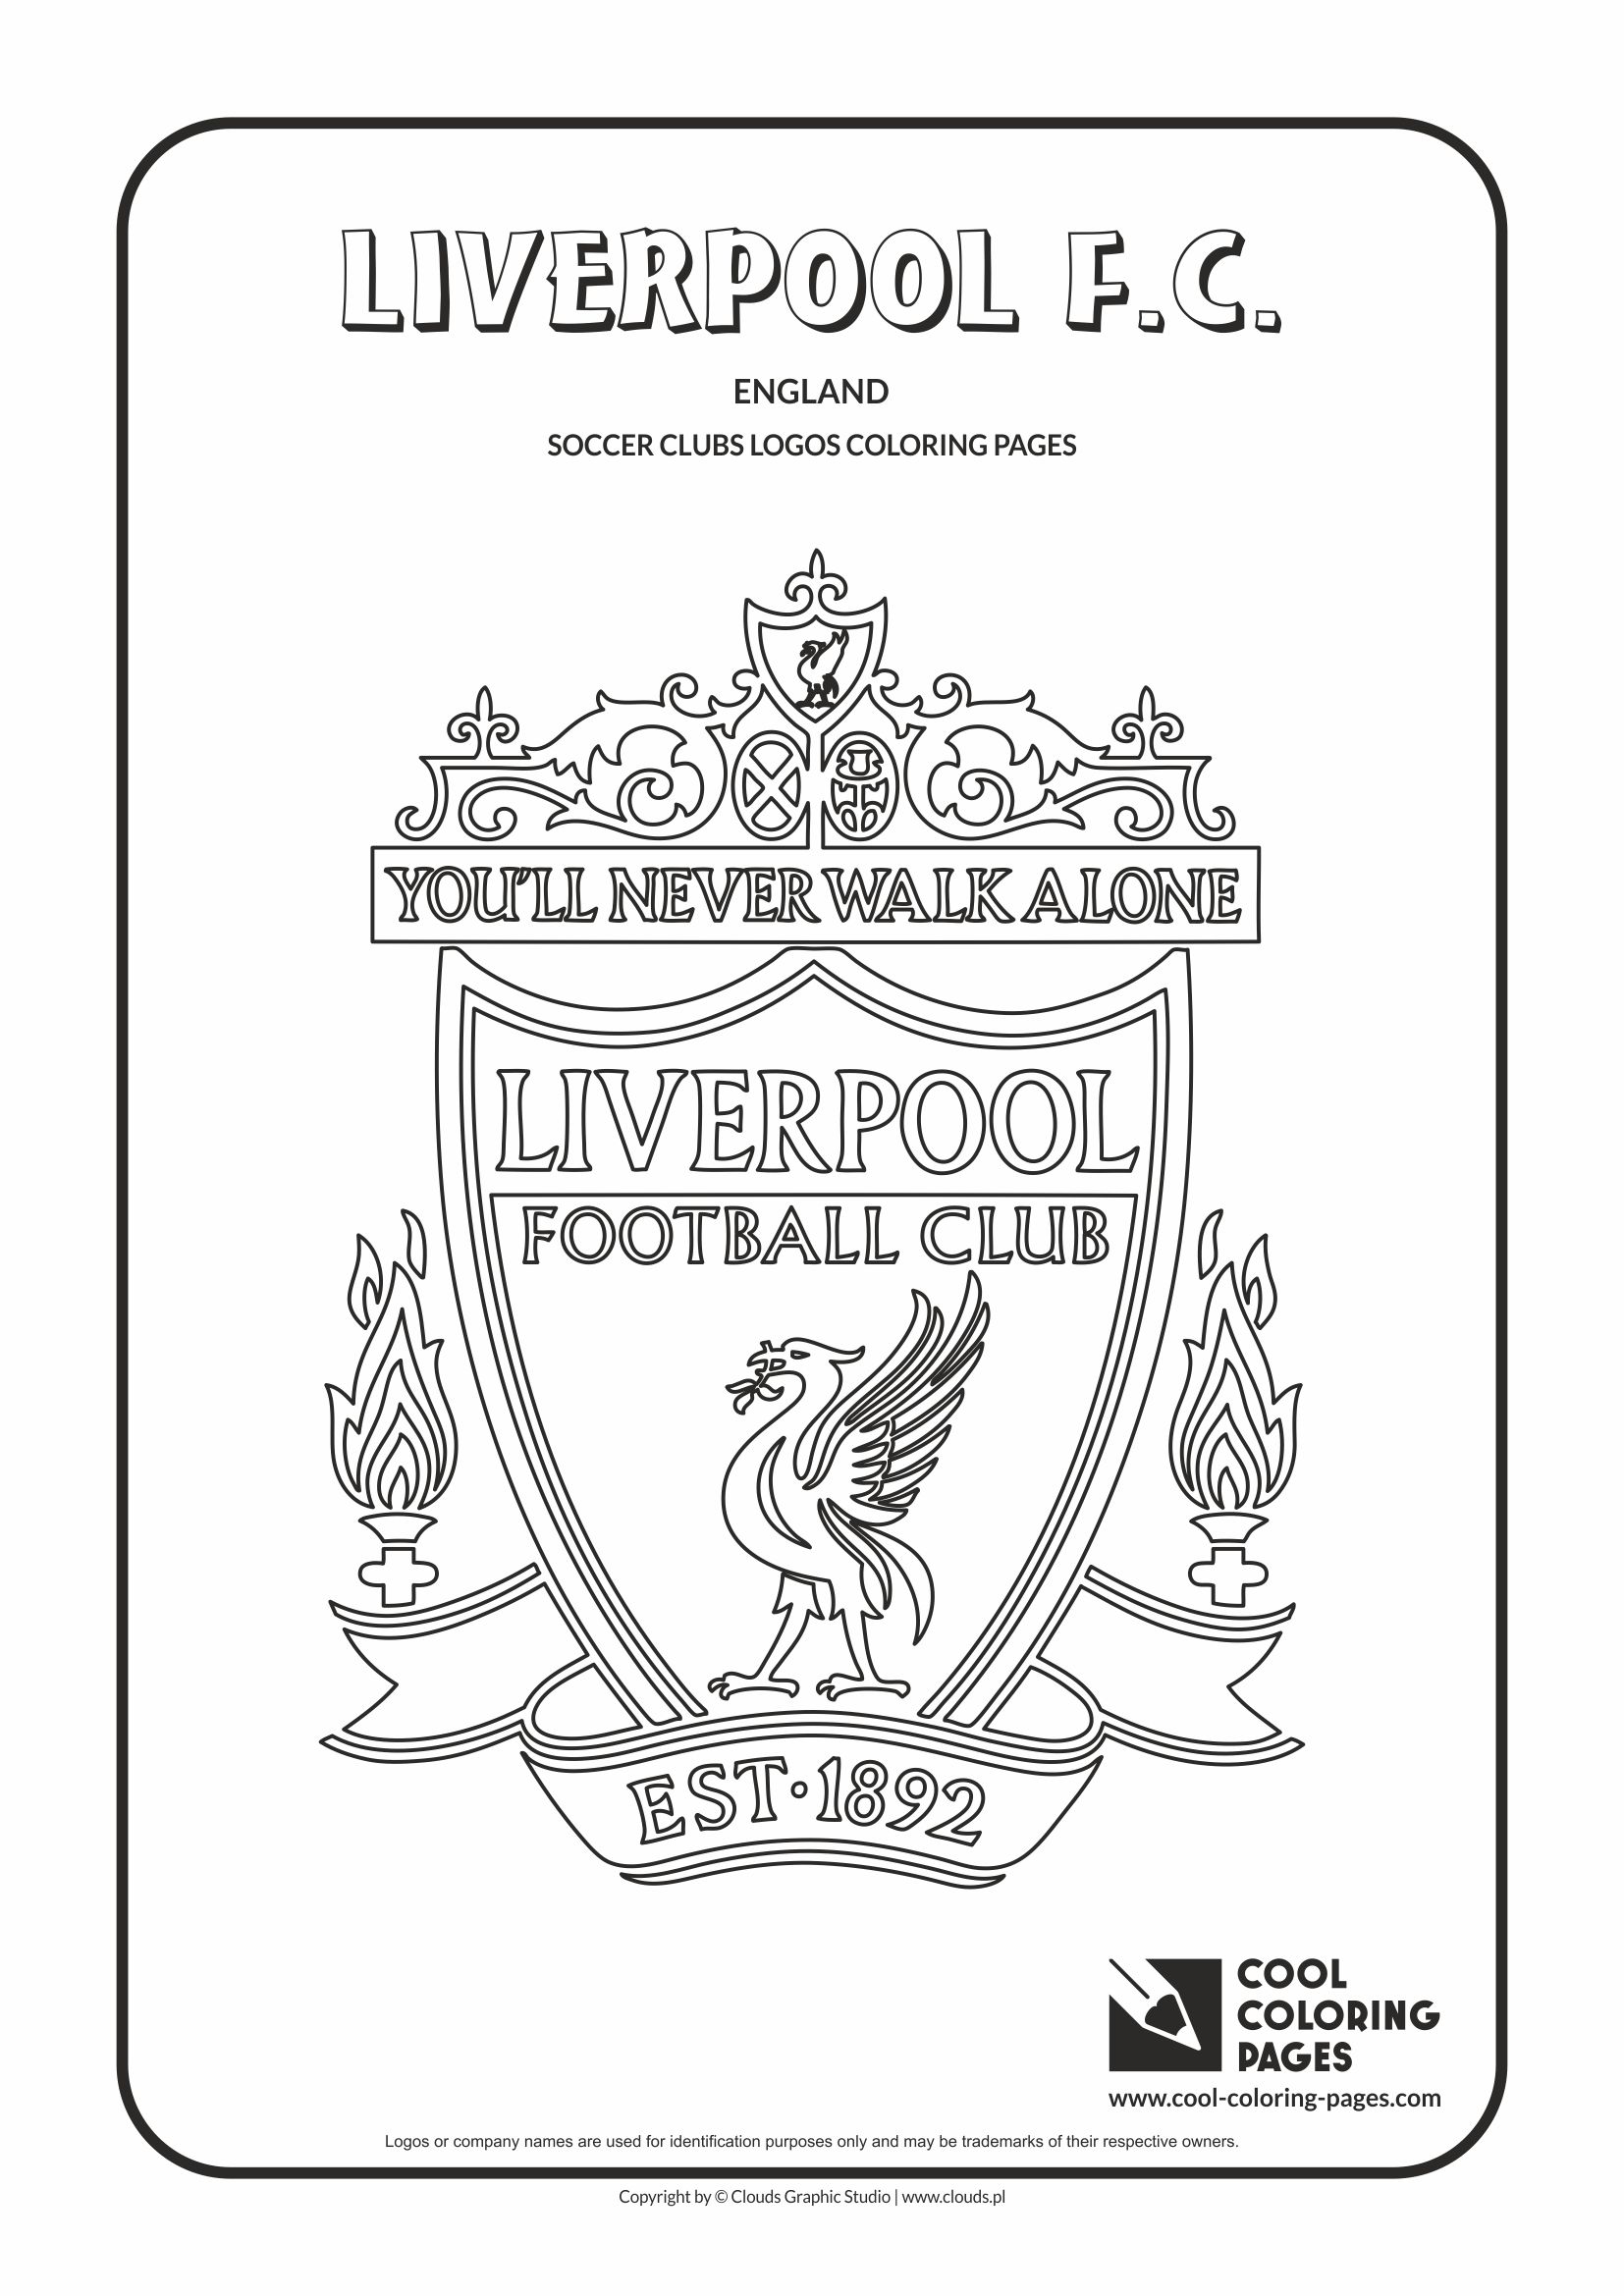 Liverpool F.C. logo coloring / Coloring page with Liverpool F.C. logo / Liverpool logo colouring page.